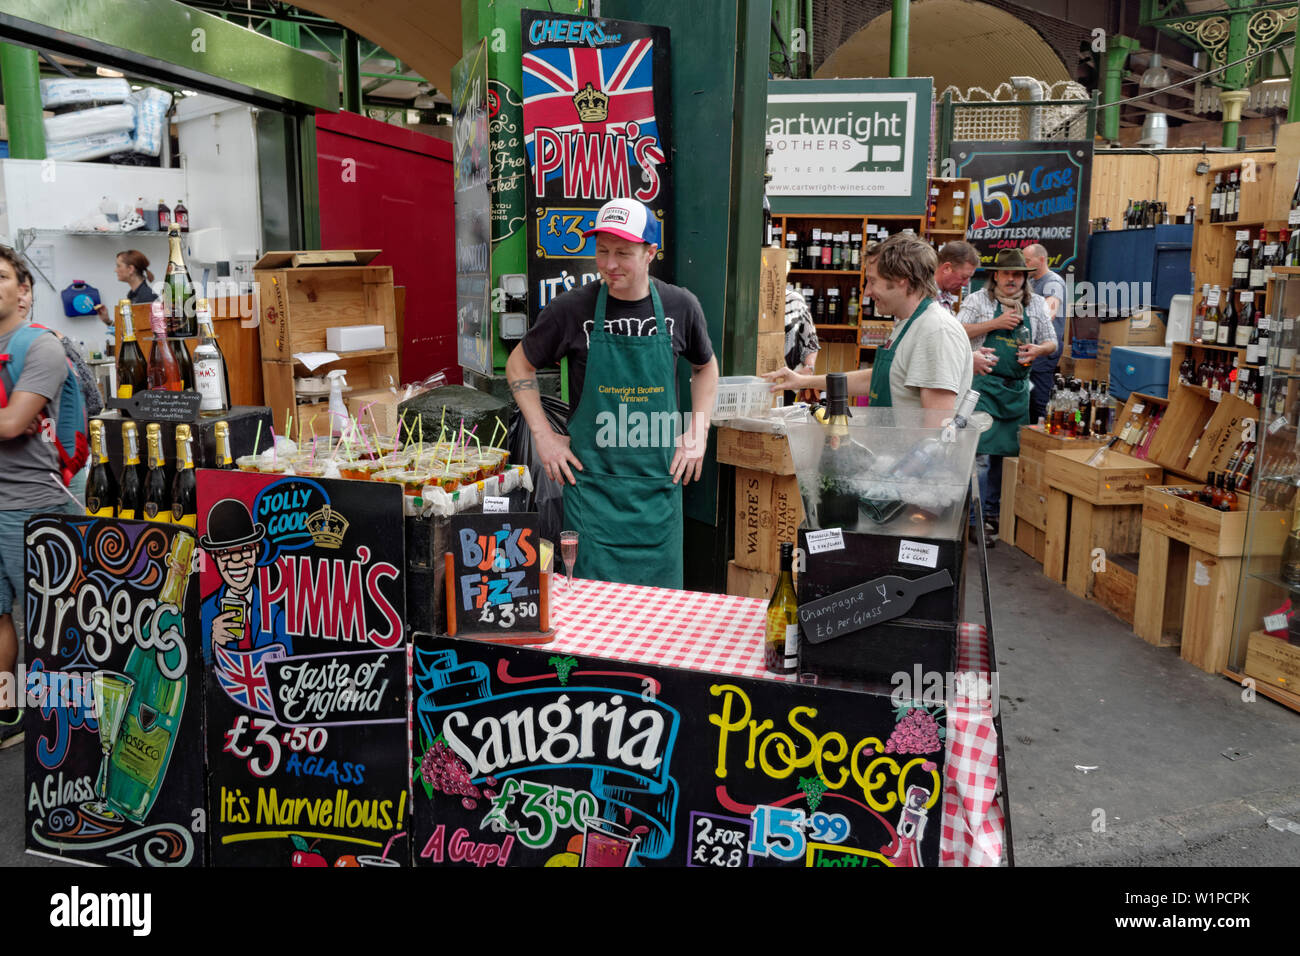 Boroughs market, market stall with alcehol, Sangria, Prosecco, wine, London, UK Stock Photo